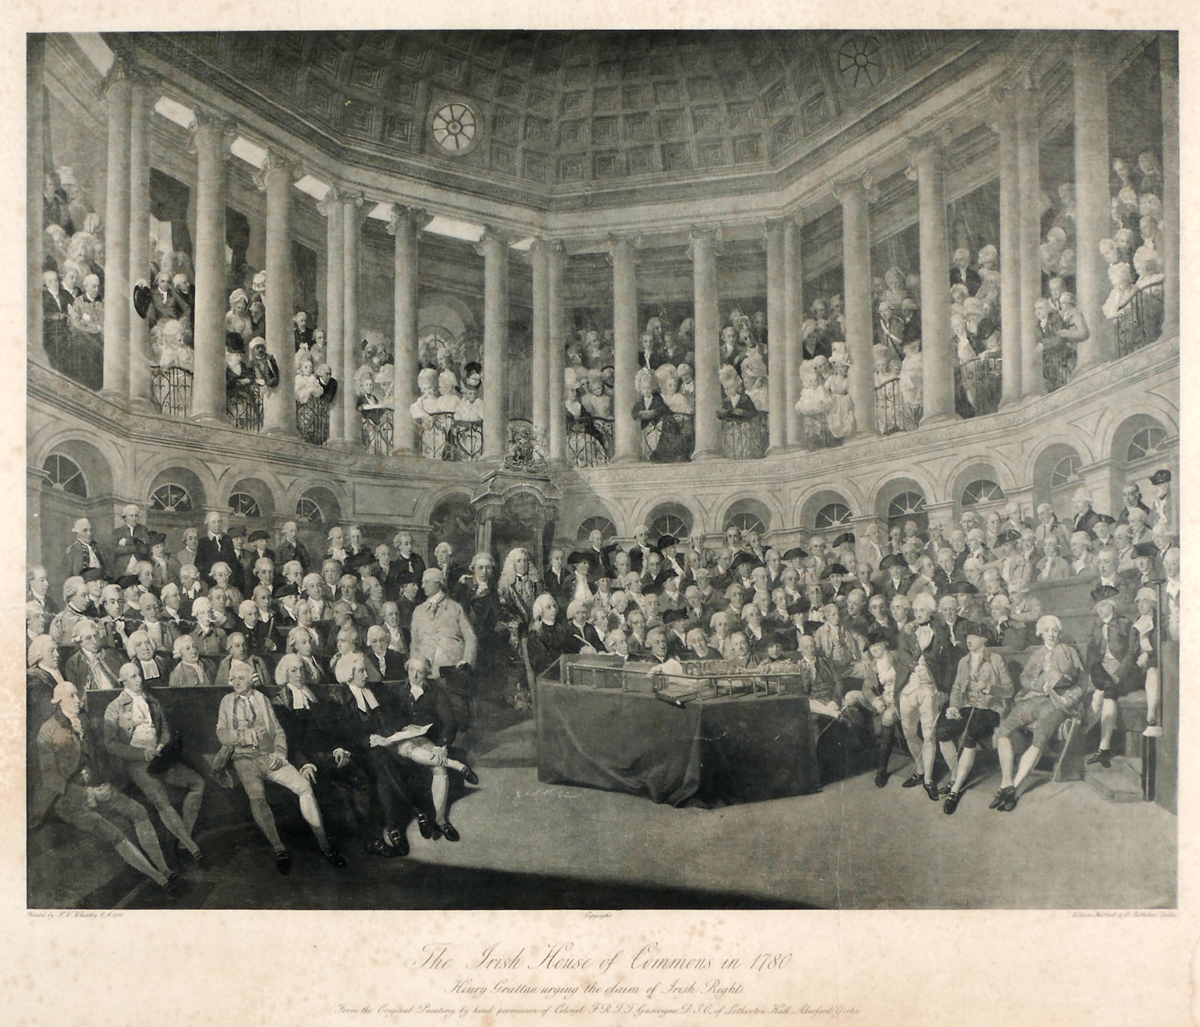 1780 Irish House of Commons - a print. Henry Grattan urging the claim of Irish Rights, after a